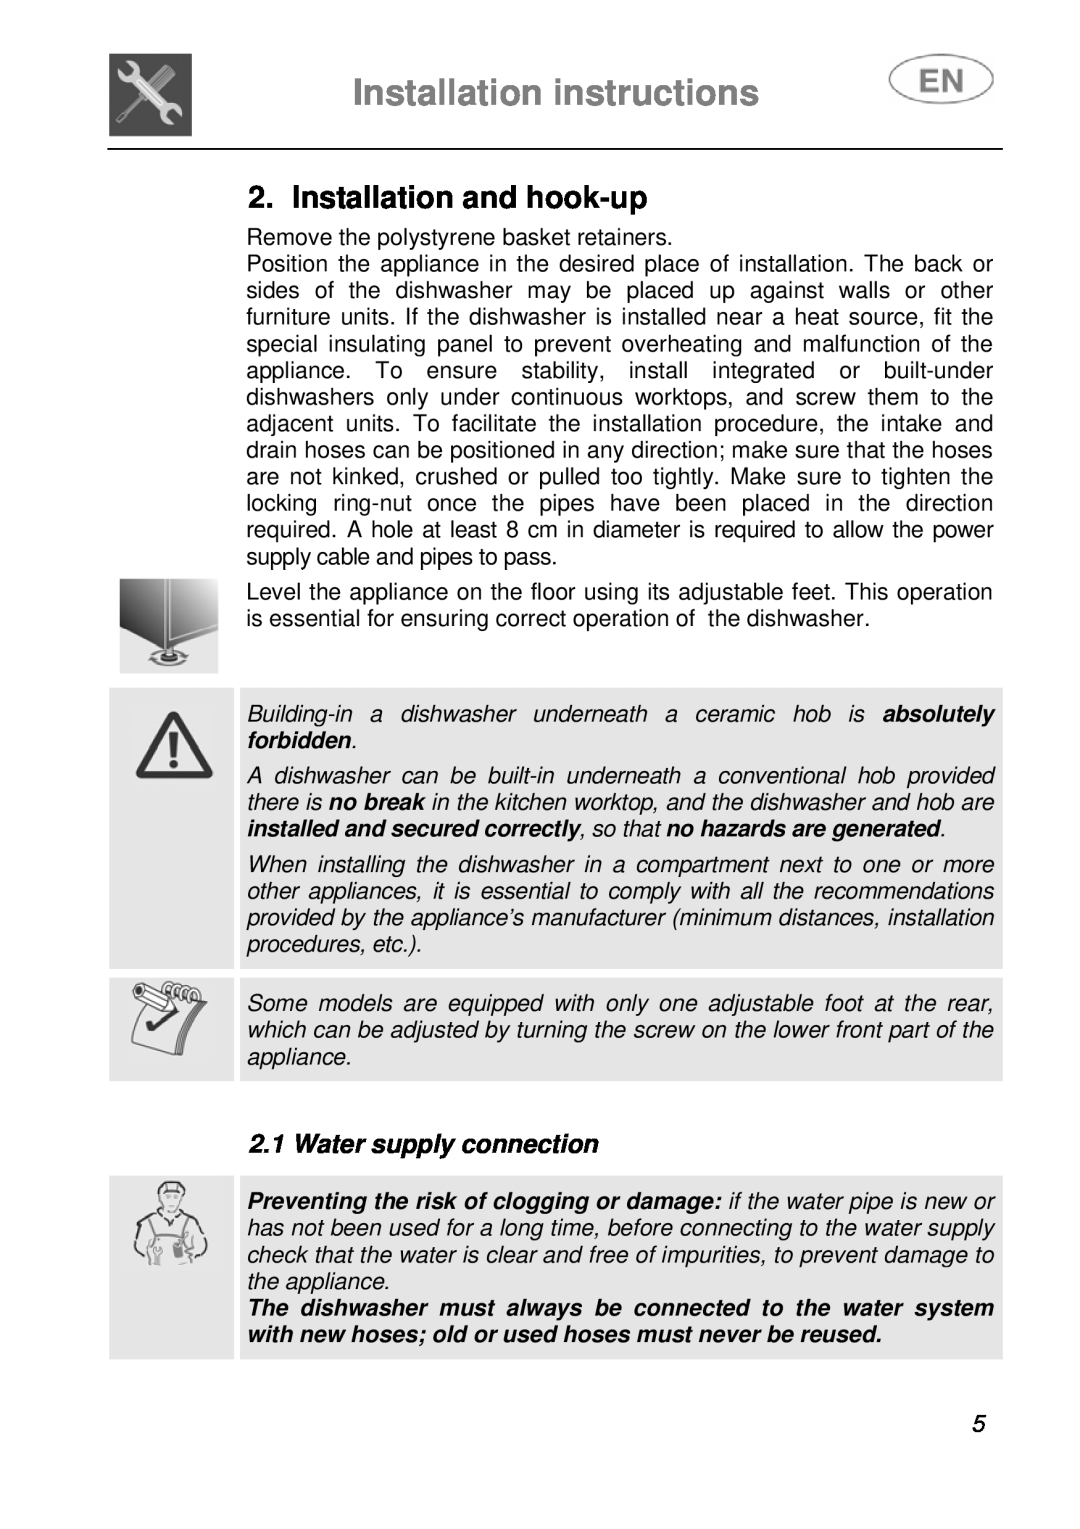 Smeg STA6245, STA6246 instruction manual Installation instructions, Installation and hook-up, Water supply connection 